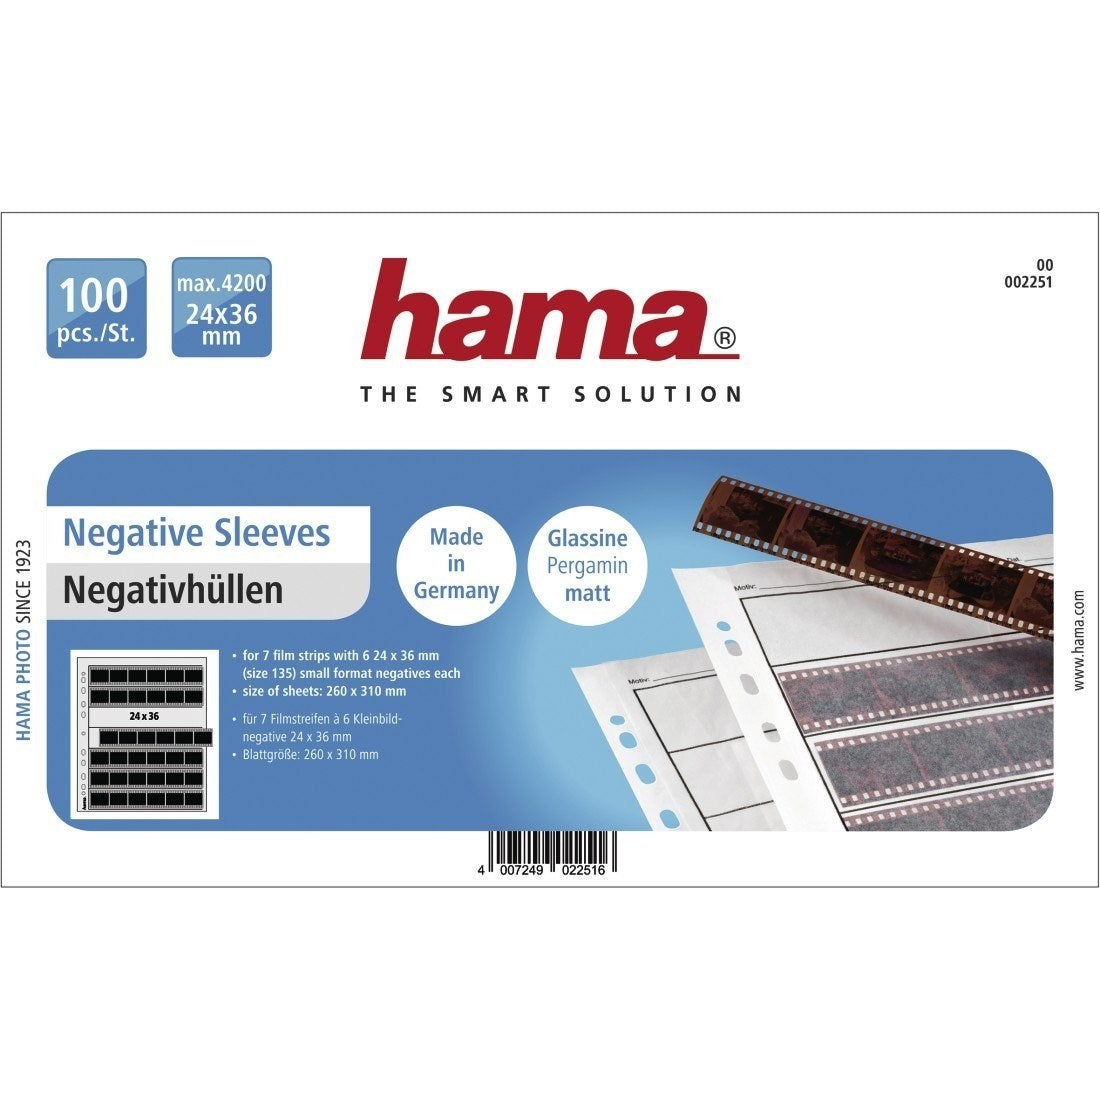 Product Image of Hama 002251 24 x 36mm Negative File Sleeves and Glassine Matt 100 Sheets